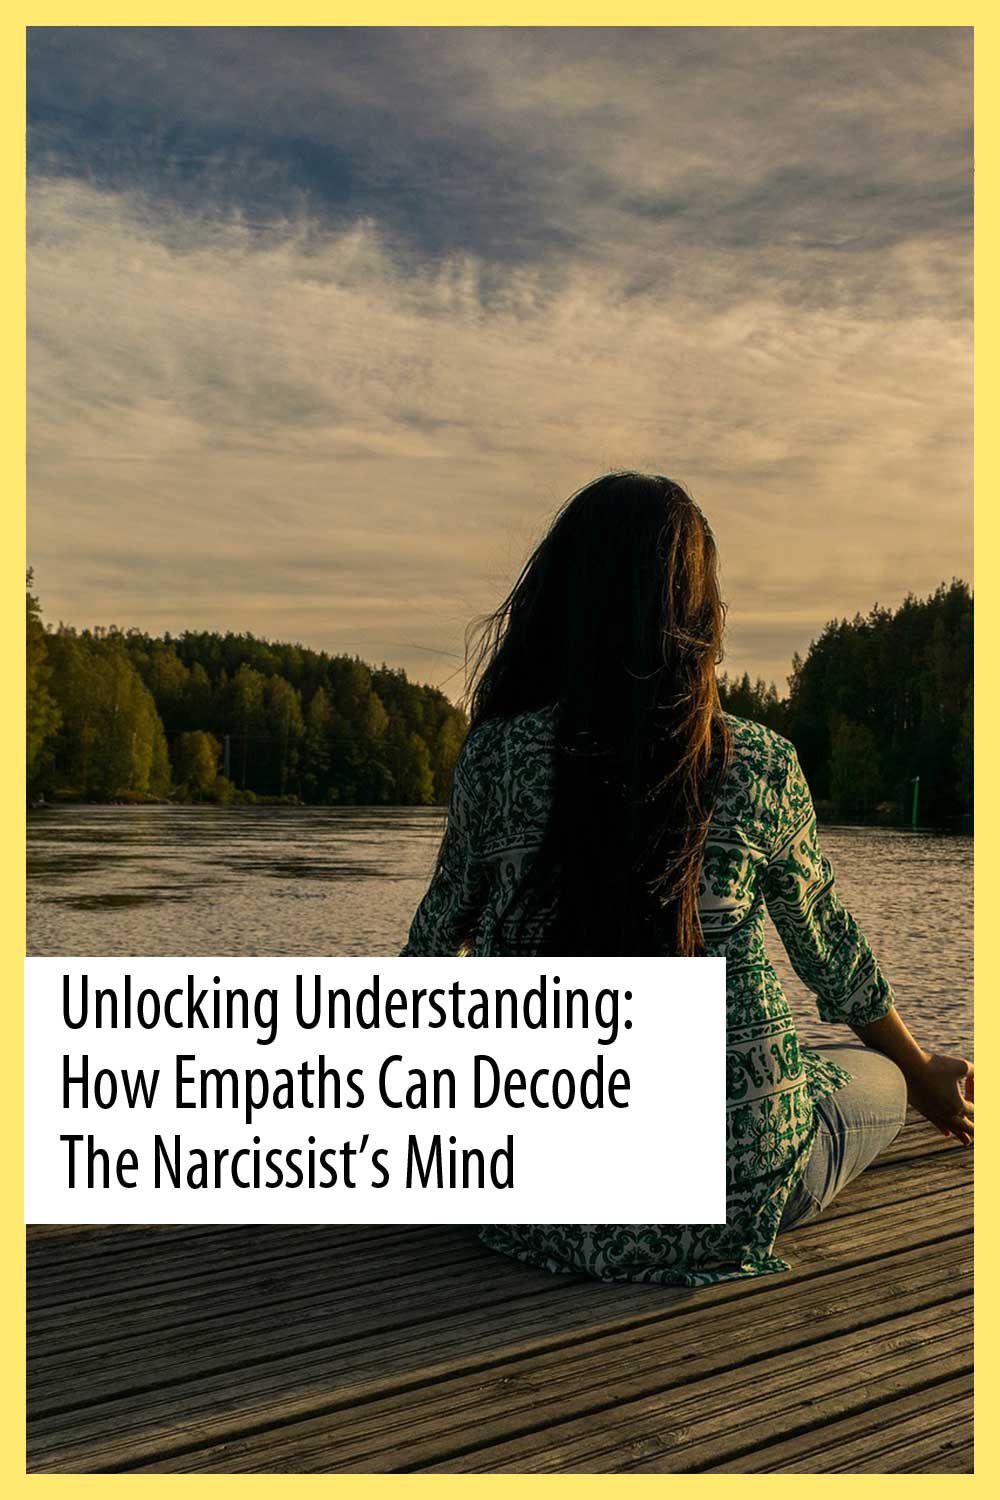 Unlocking Understanding: How Empaths Can Decode the Narcissist’s Mind